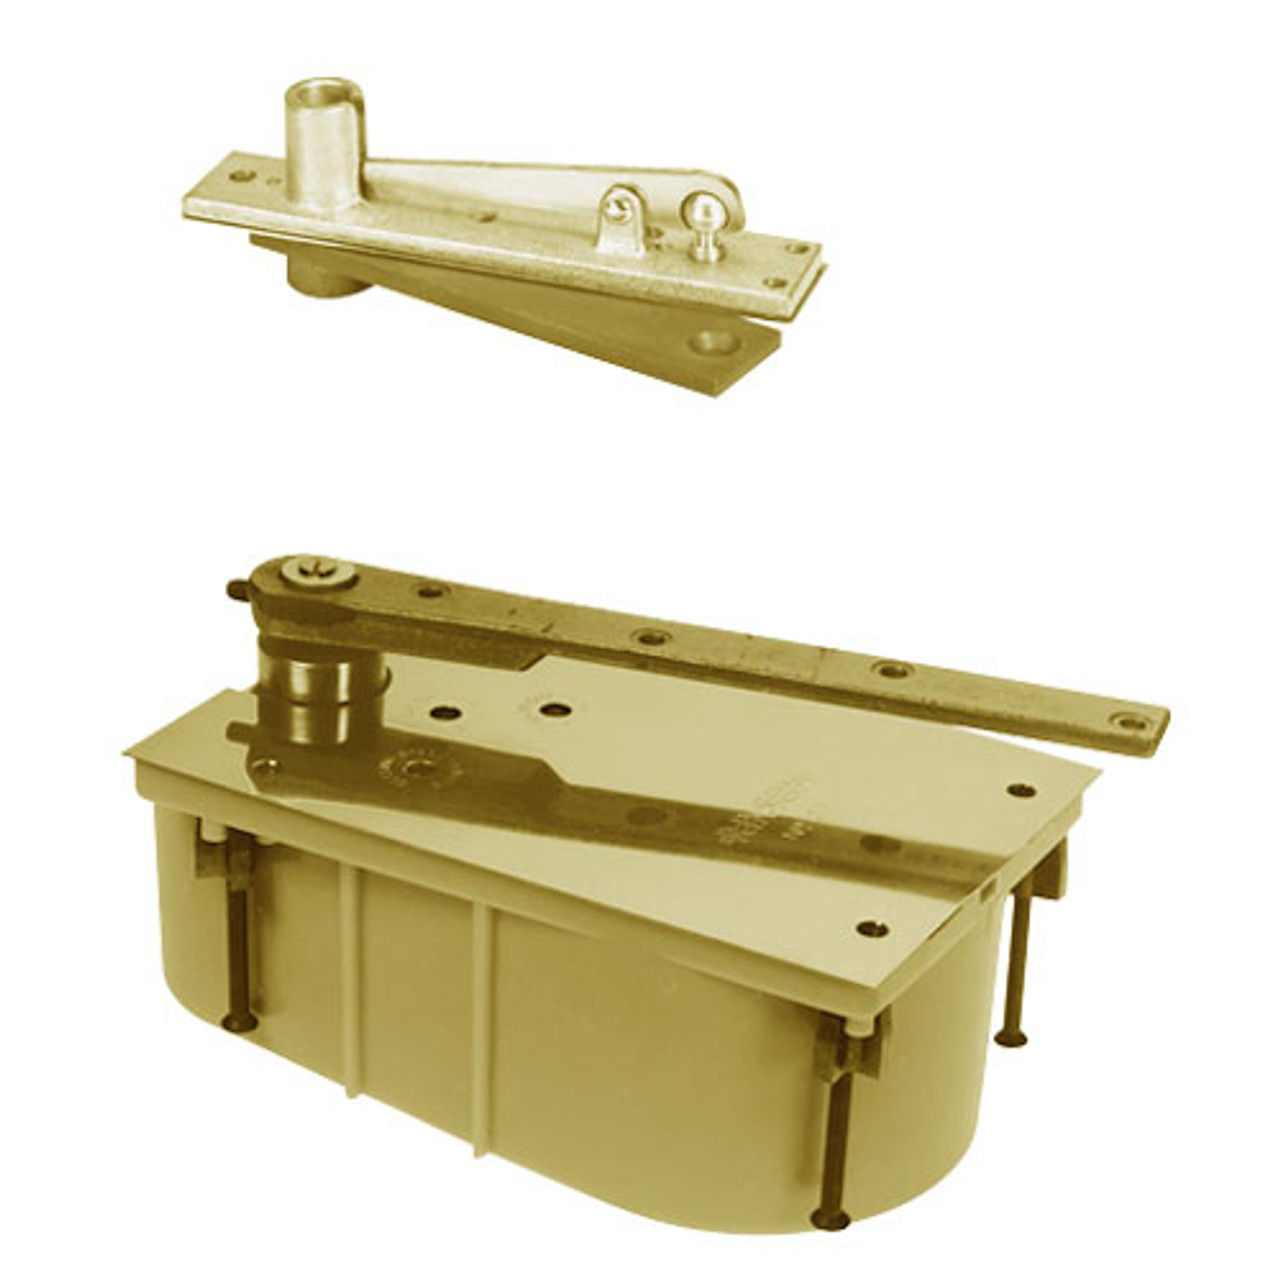 28-85N-554-LTP-RH-606 Rixson 28 Series Heavy Duty Single Acting Center Hung Floor Closer with Concealed Arm in Satin Brass Finish